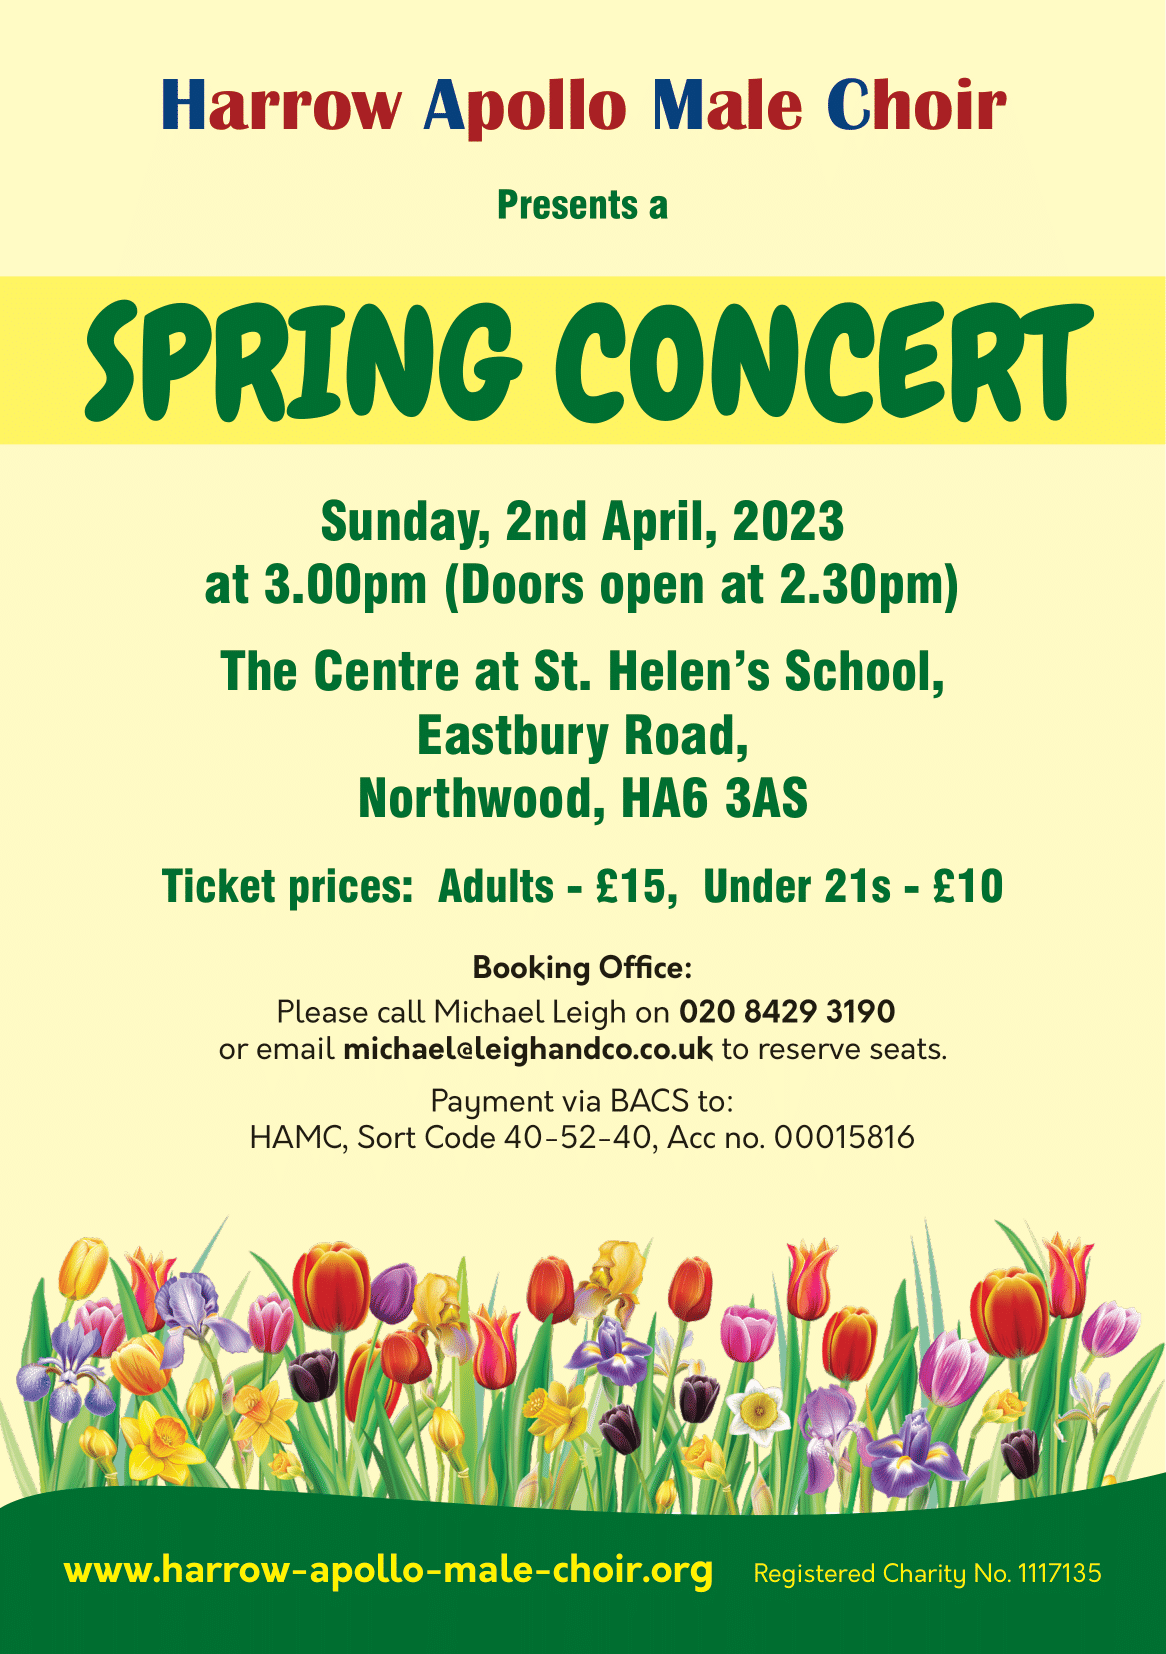 Spring Concert Sunday, 2nd April, 3:00pm. The Centre at st. Helen's School, Eastbury Road,northwood, HA6 3AS